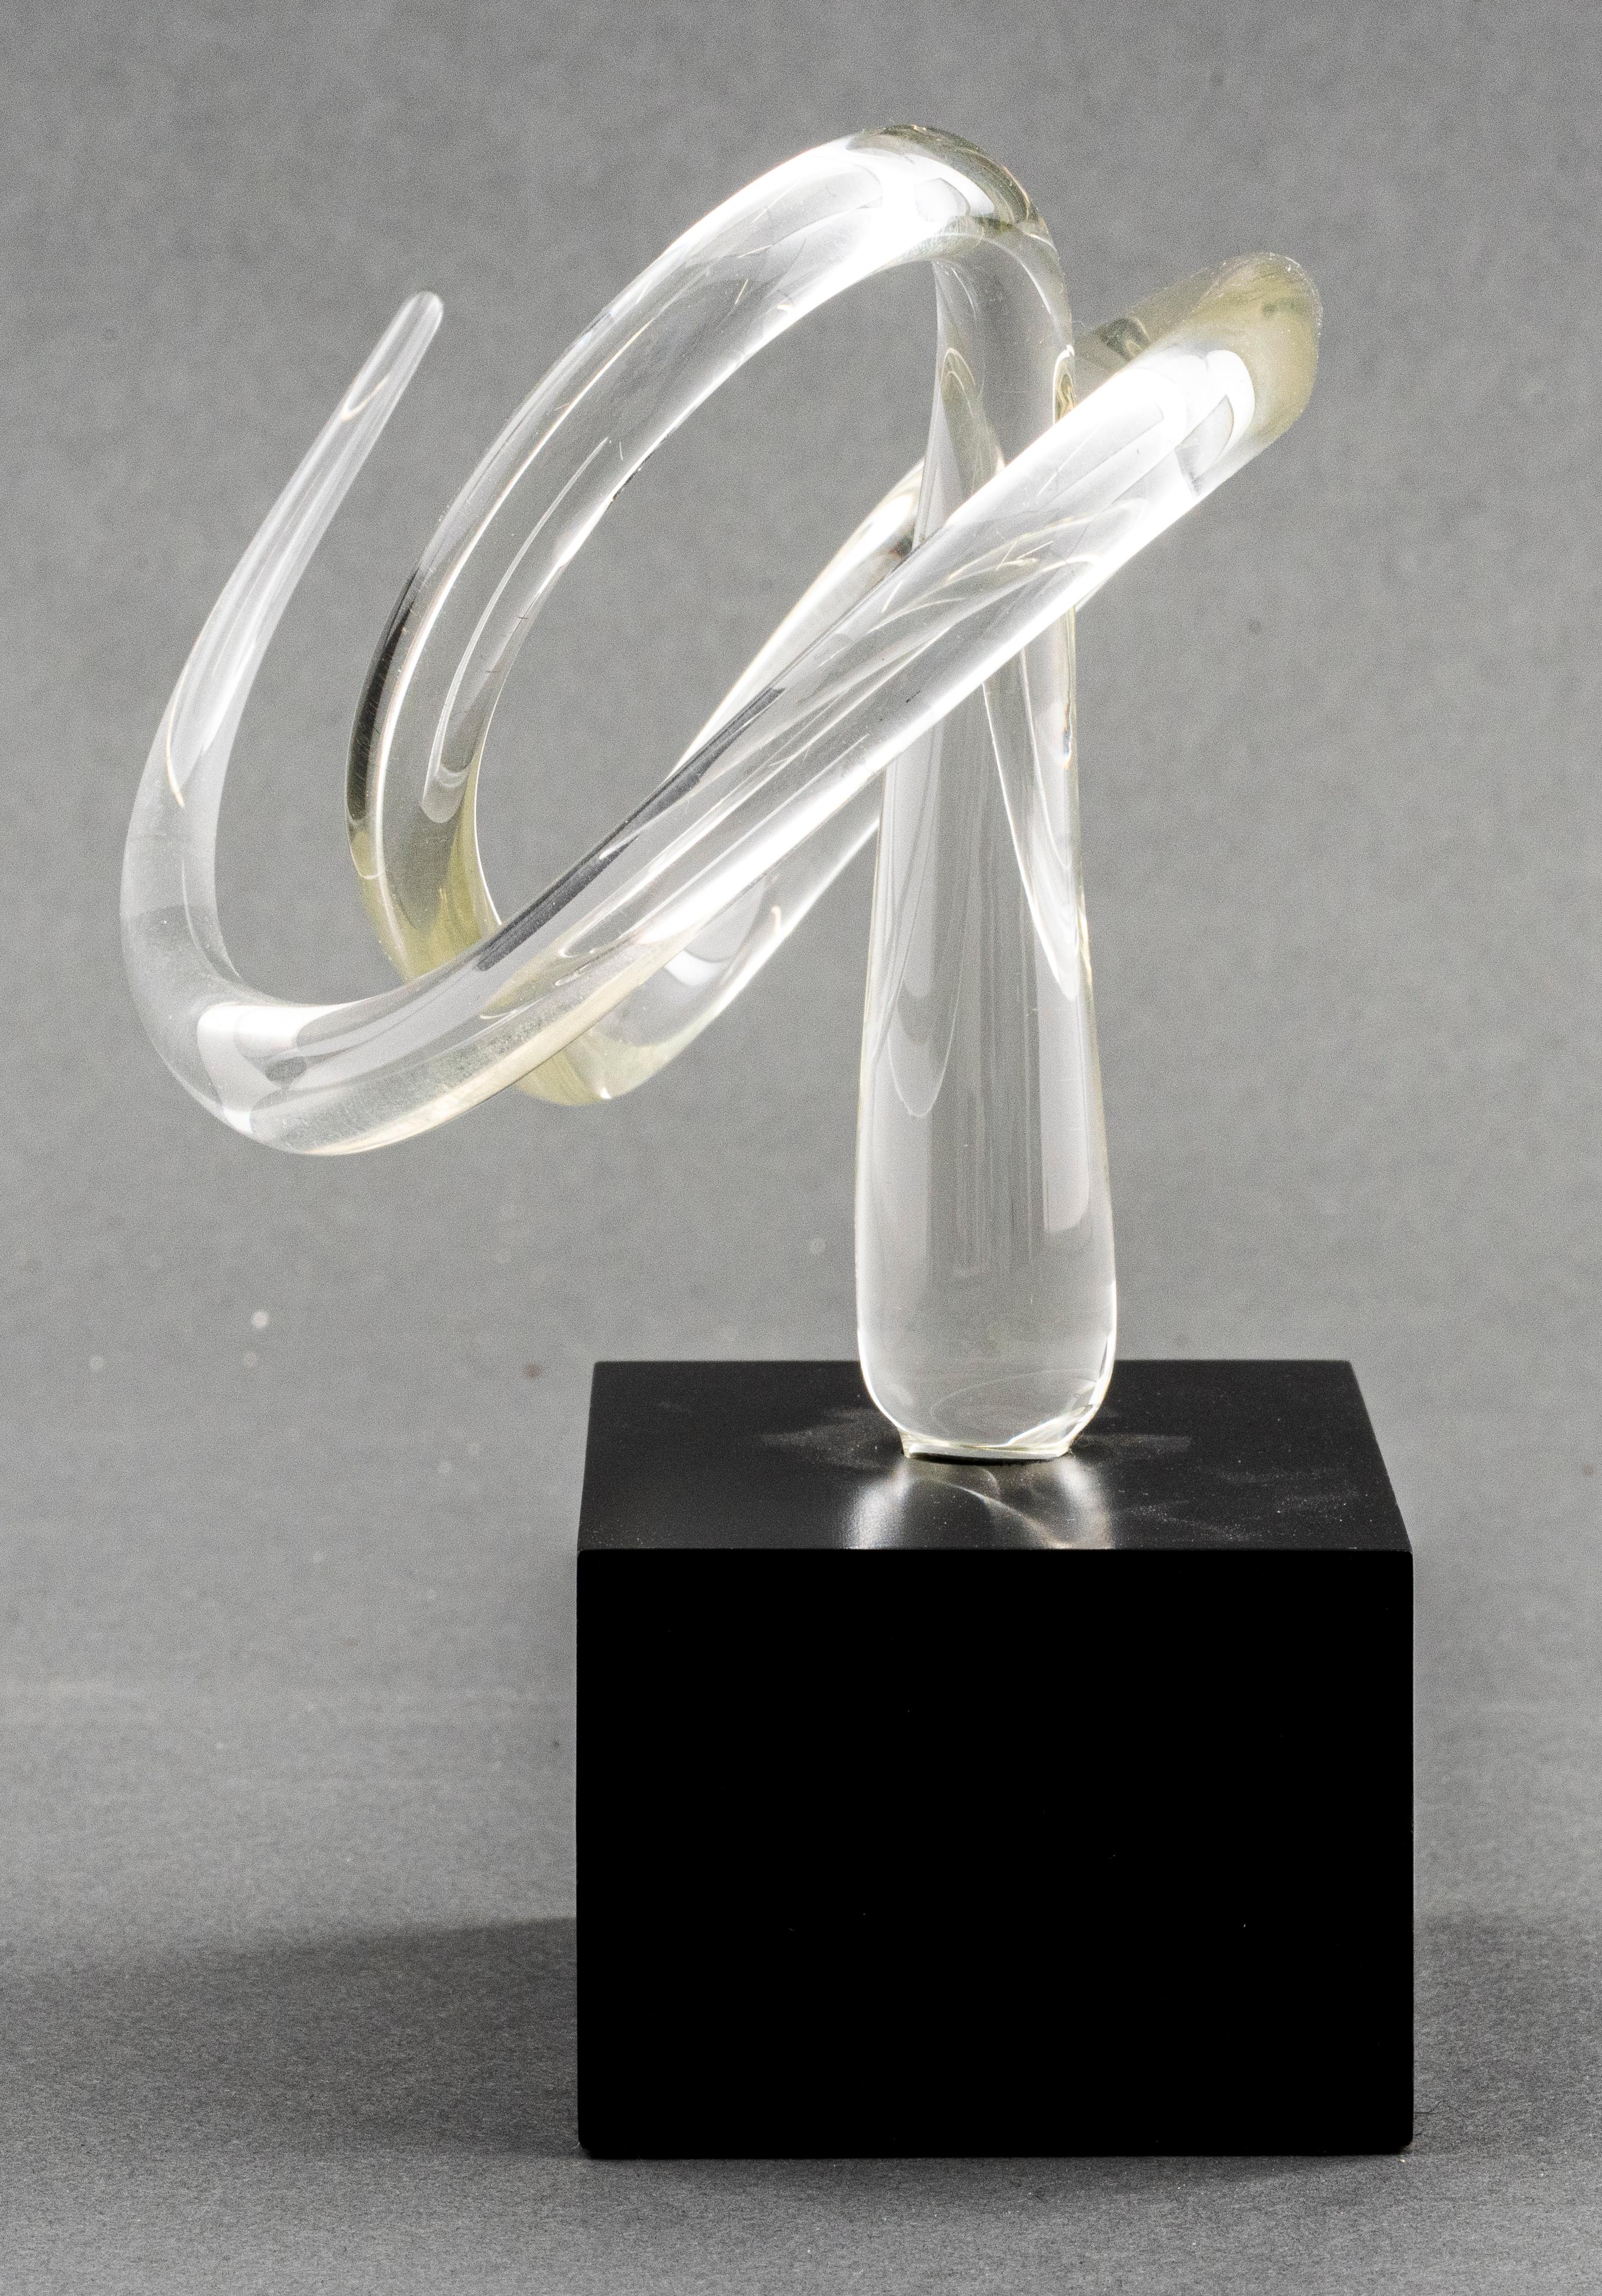 Warner Whitfield and Beatriz Kelemen, abstract glass sculpture, 1990, signed. Measures: 6